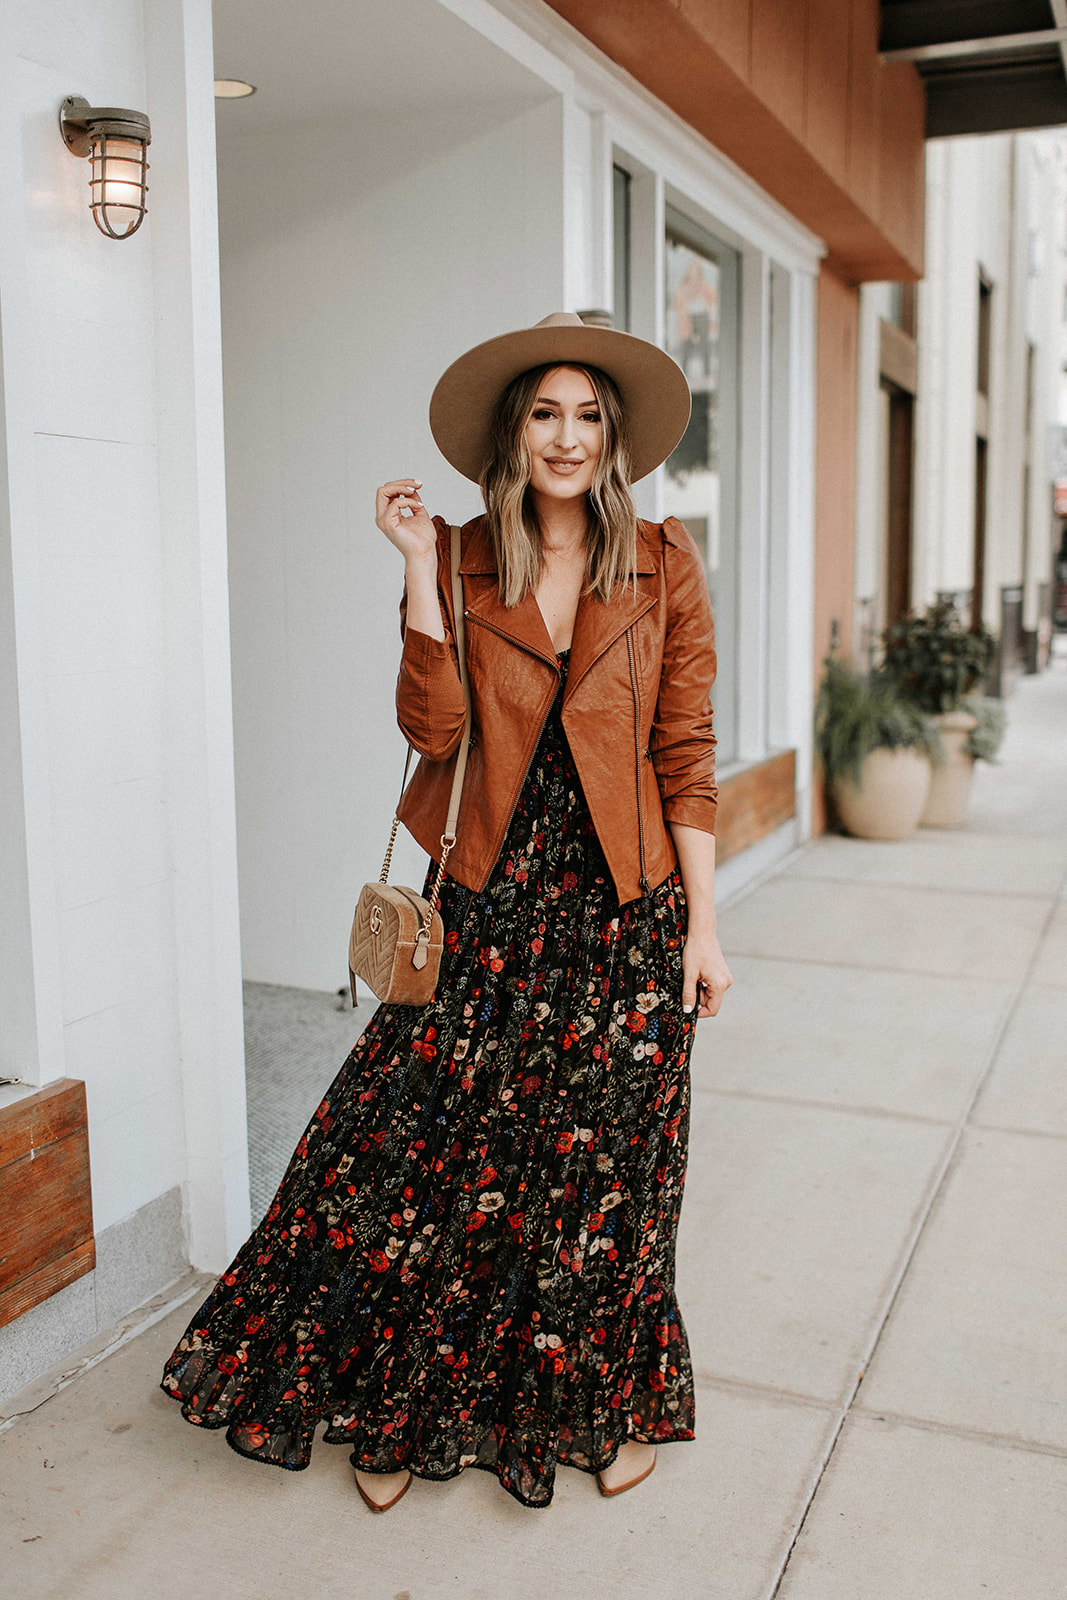 fall maxi dress and ankle boots outfit